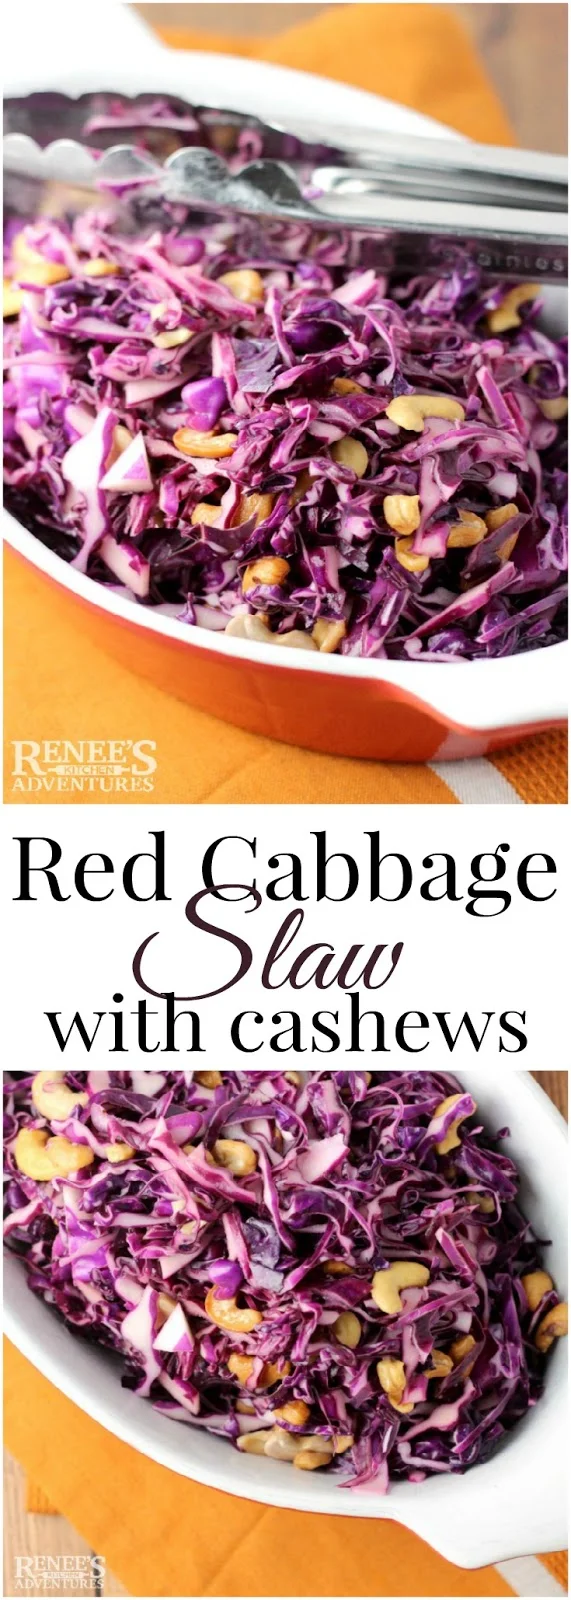 Red Cabbage with Cashews -easy, healthy, vegetarian coleslaw recipe